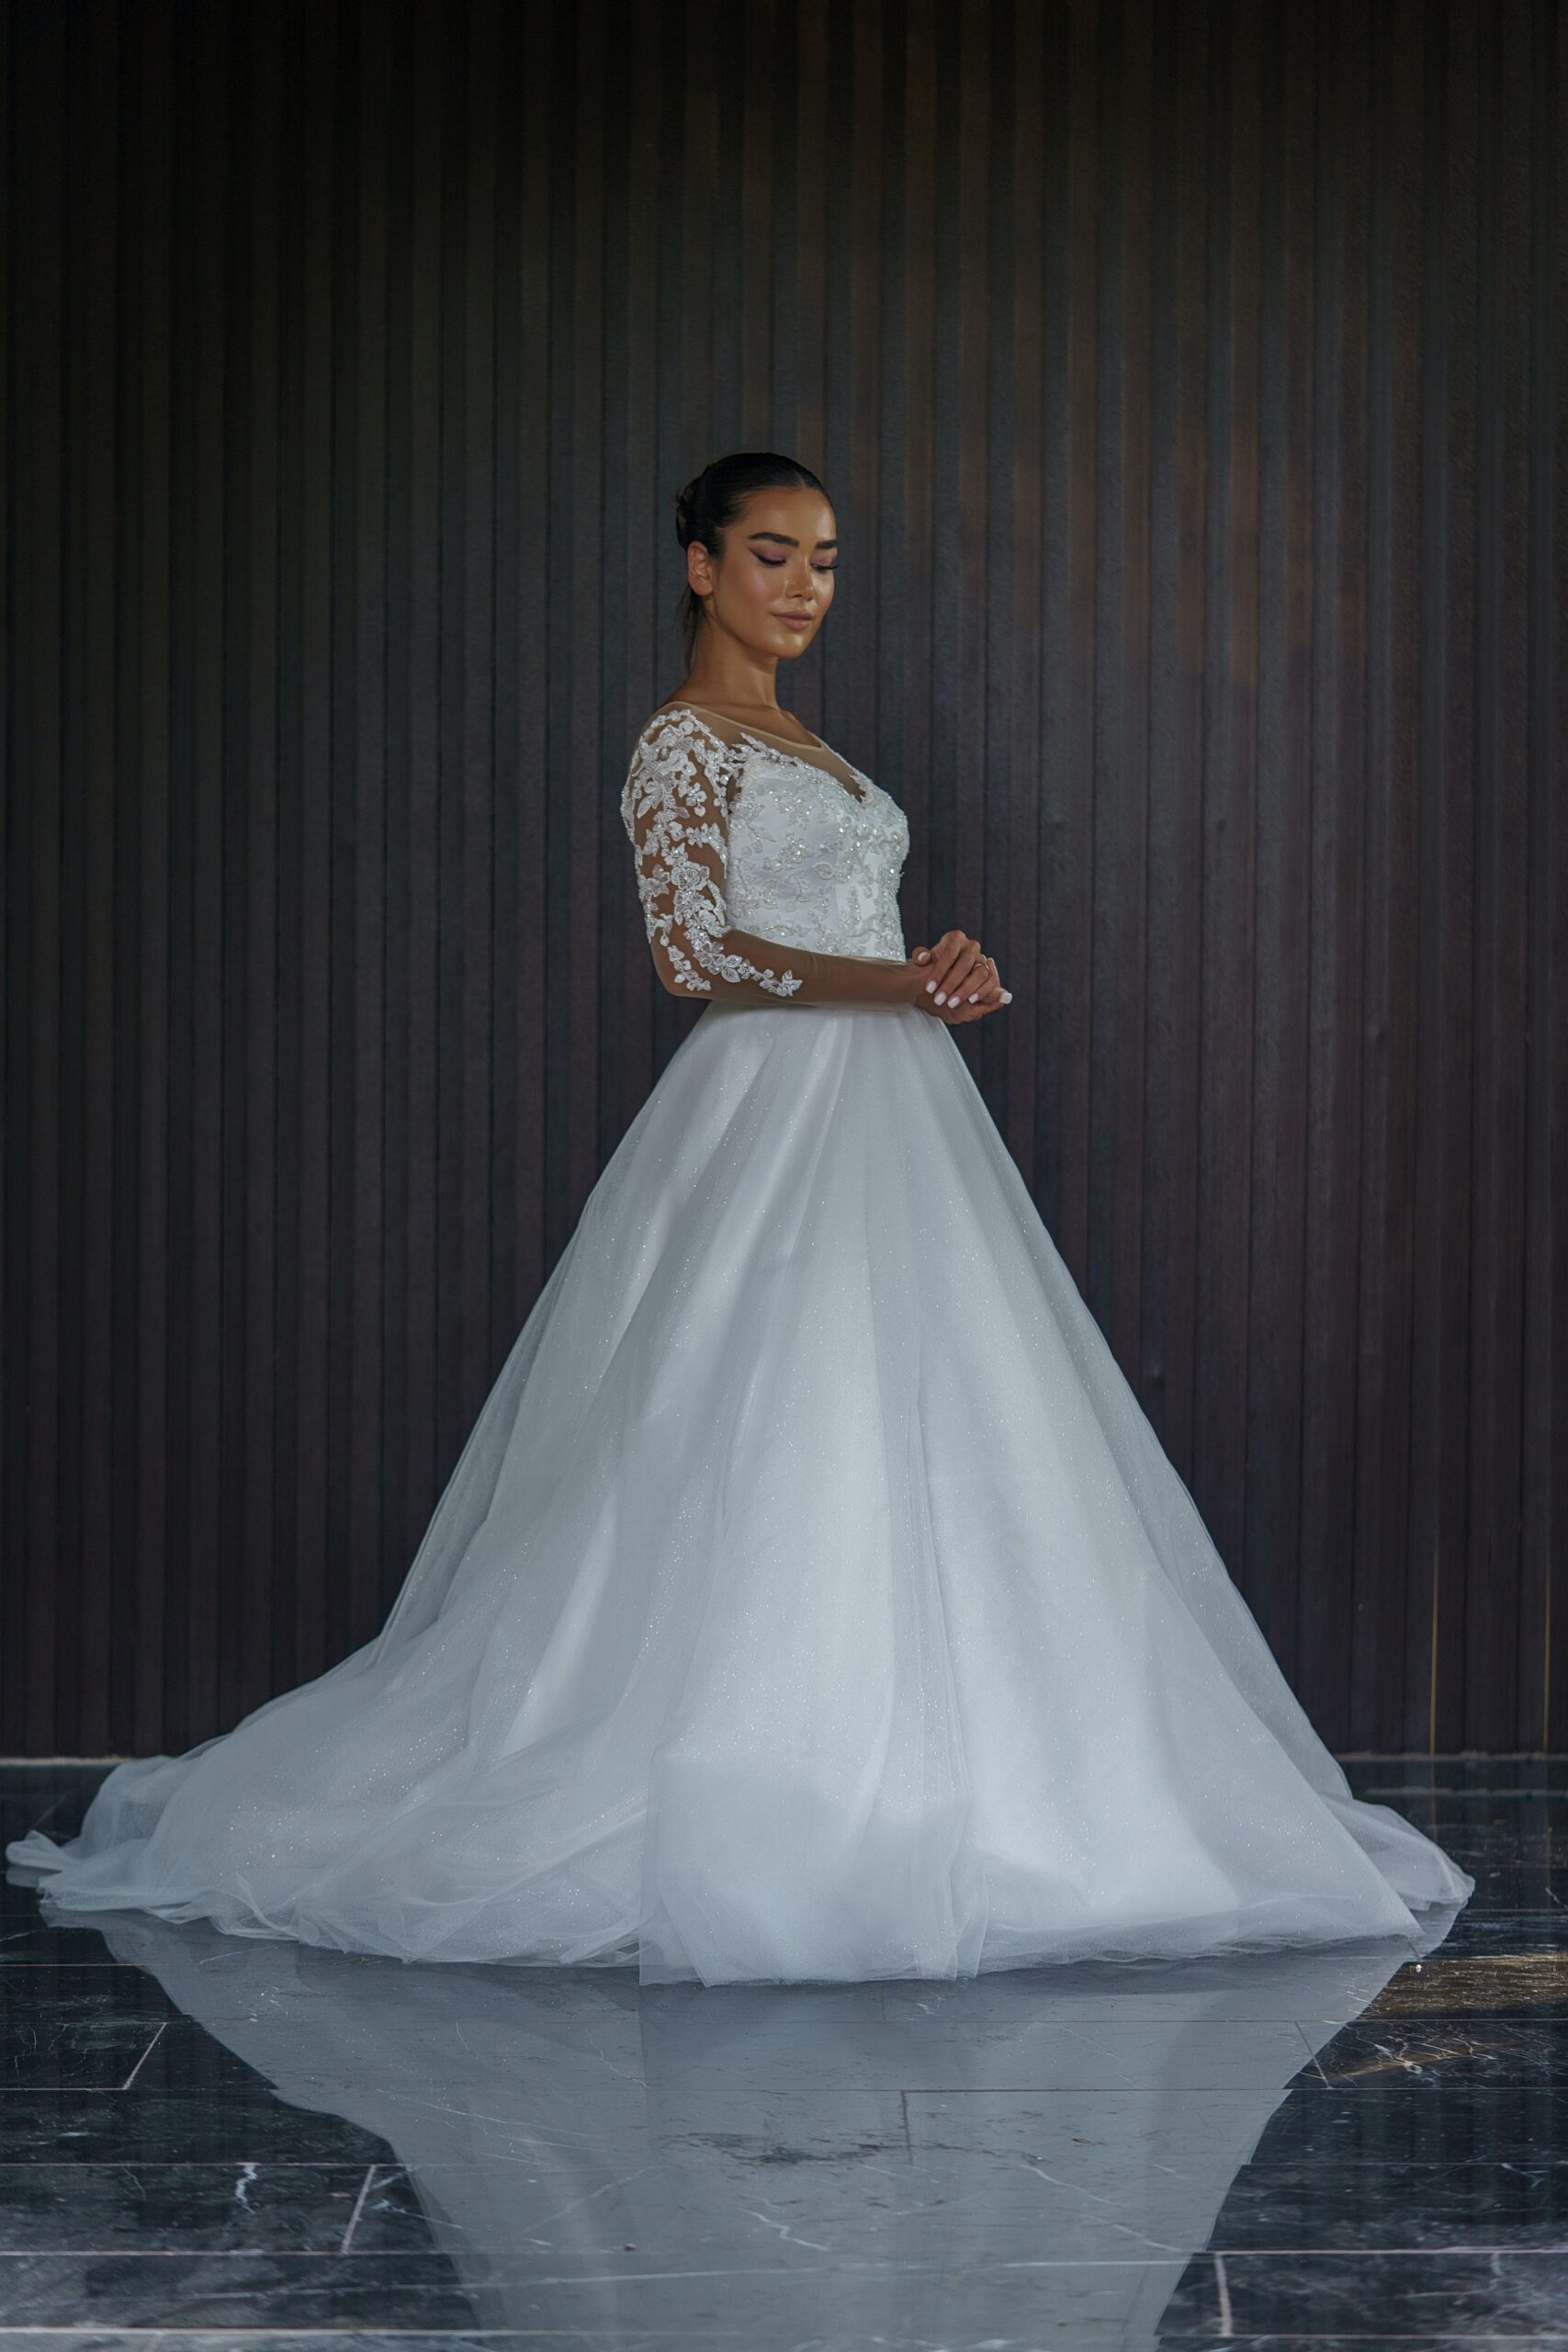 Perfect Bridal Dress for Your Dream Wedding